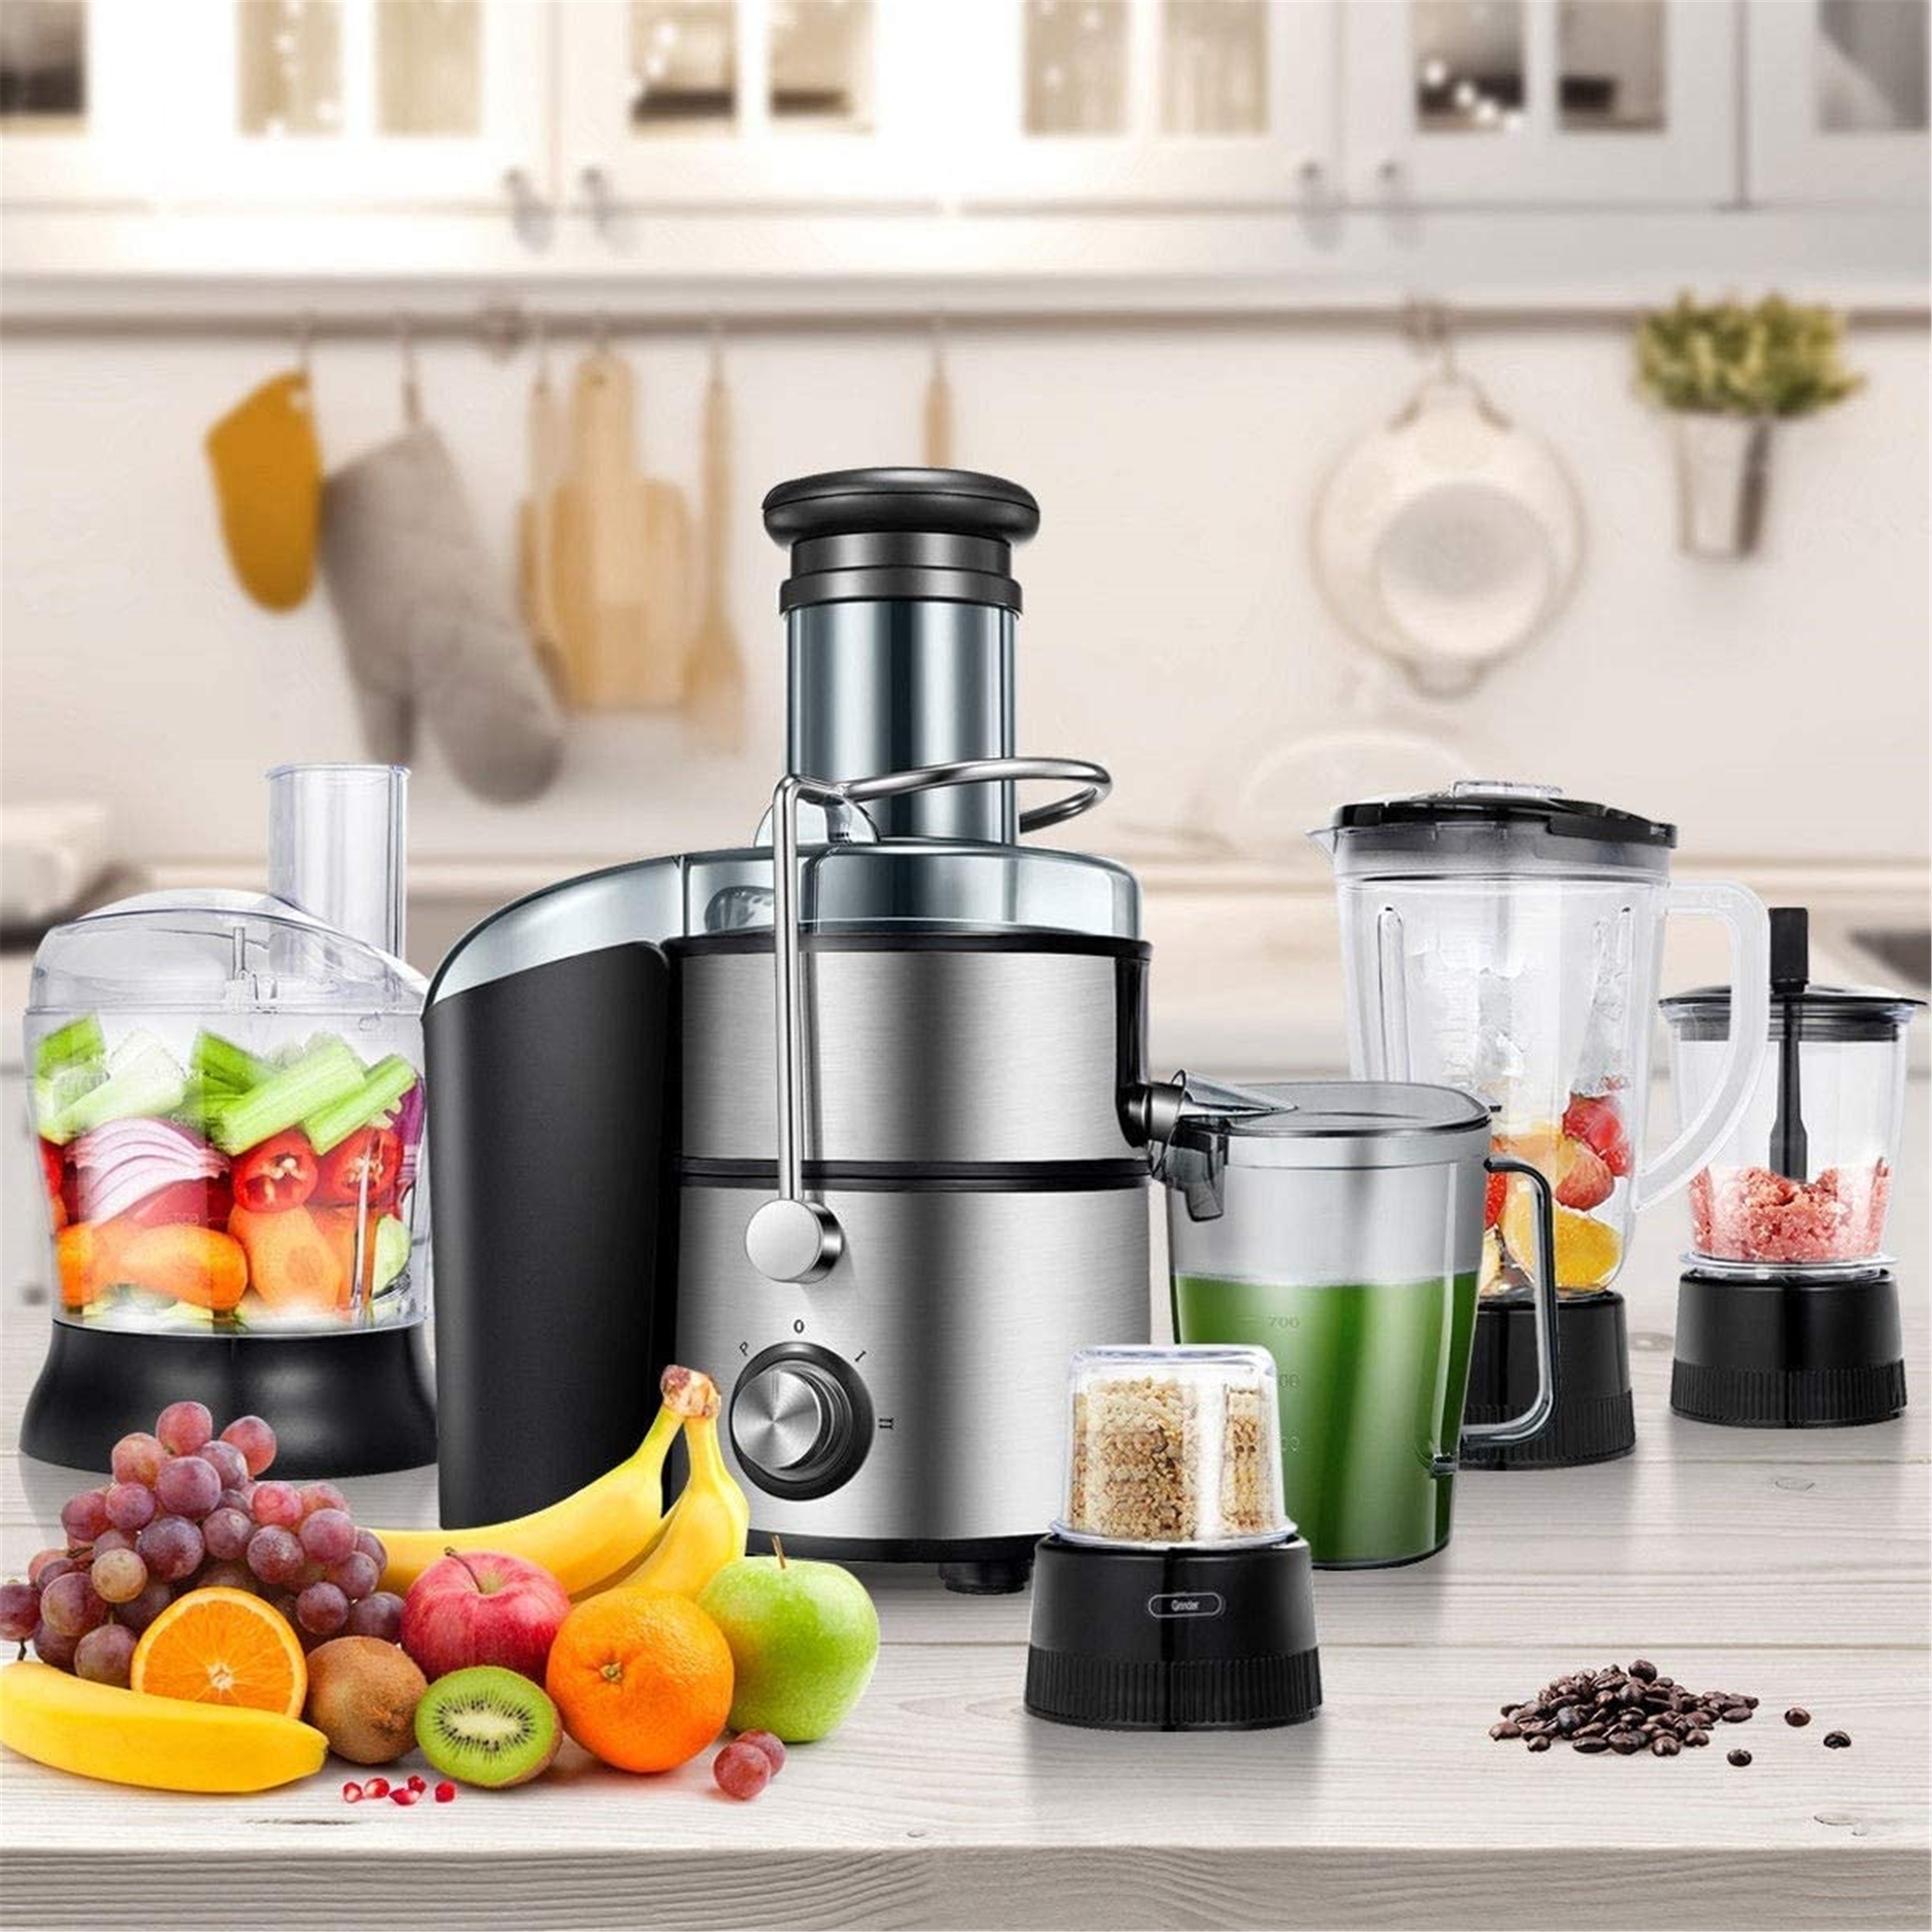 https://ak1.ostkcdn.com/images/products/is/images/direct/69614d8a554eea66faaff533683f63a96d02e868/5-in-1-Multifunction-Juice-Extractor-Juicer-Blender-800-Watts-2-Speed-Adjustable.jpg